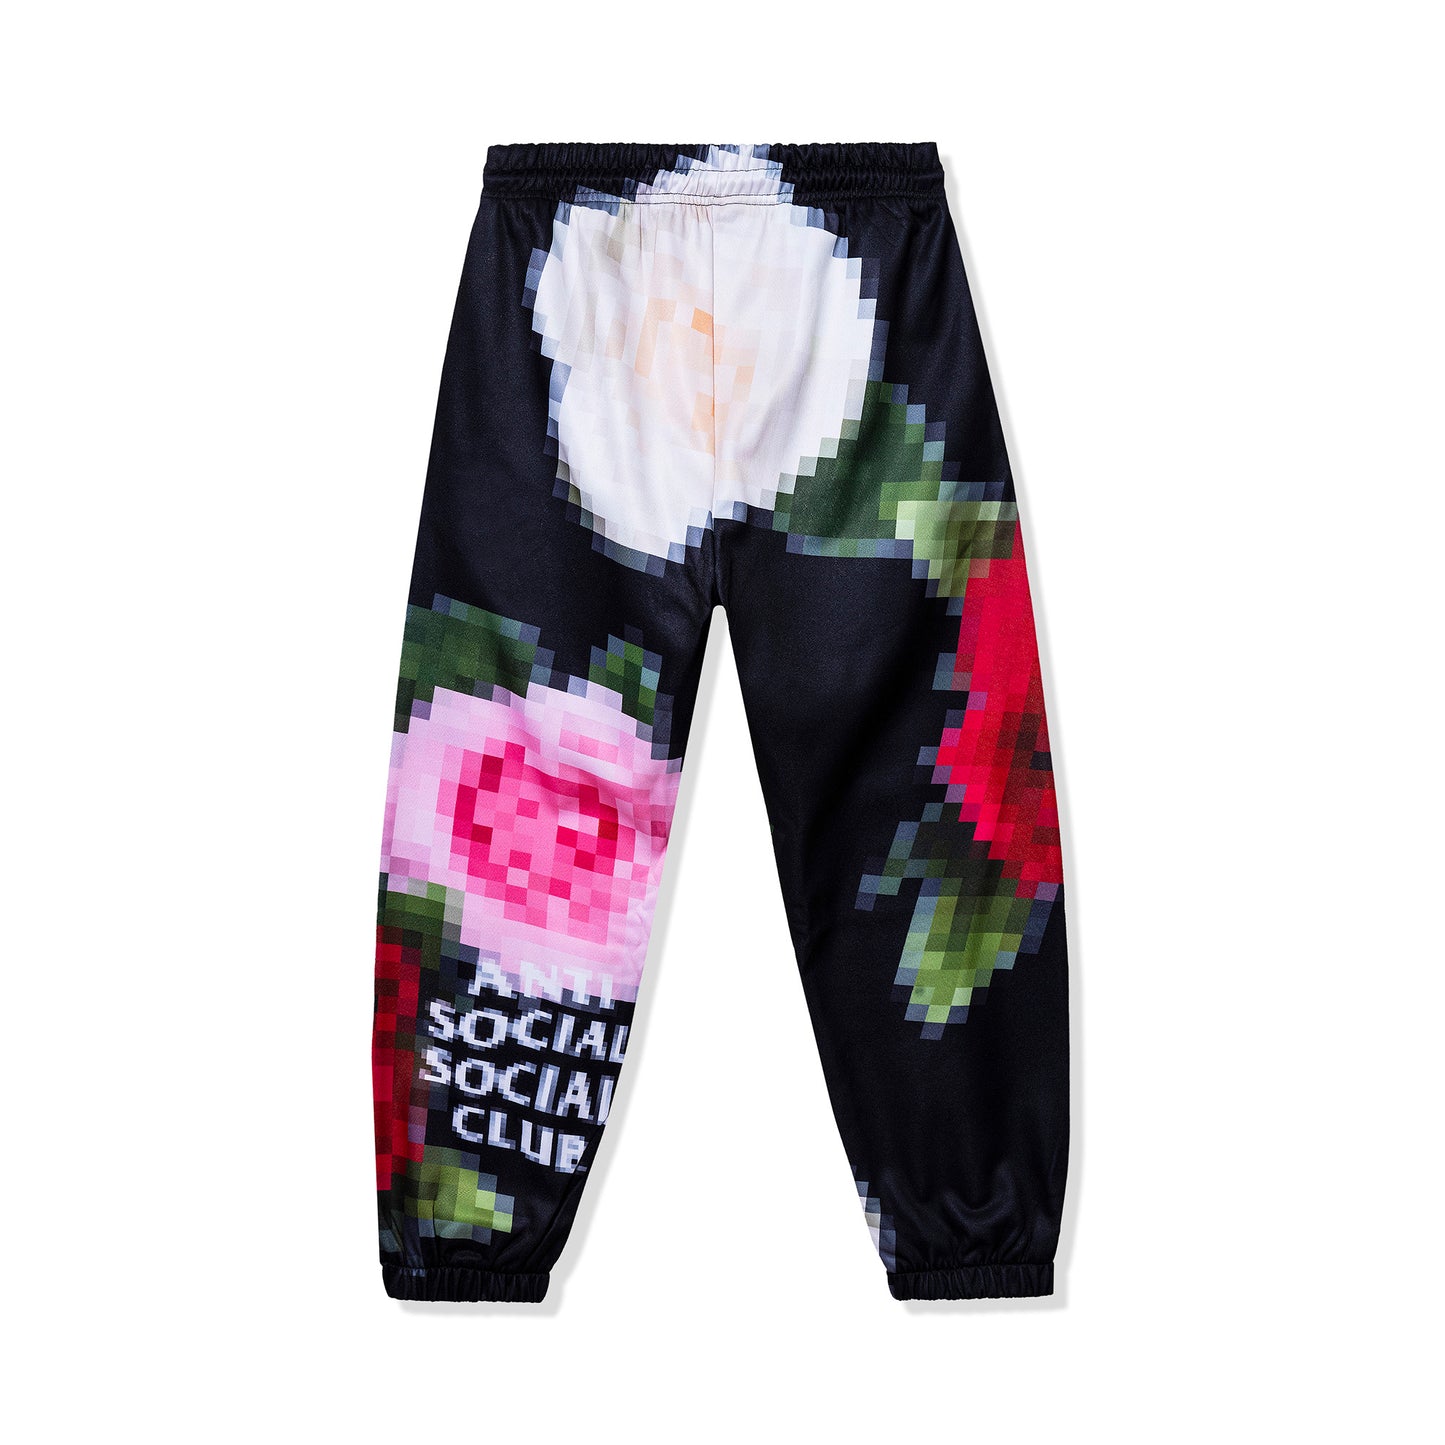 Are You Ready Sweatpant - Black